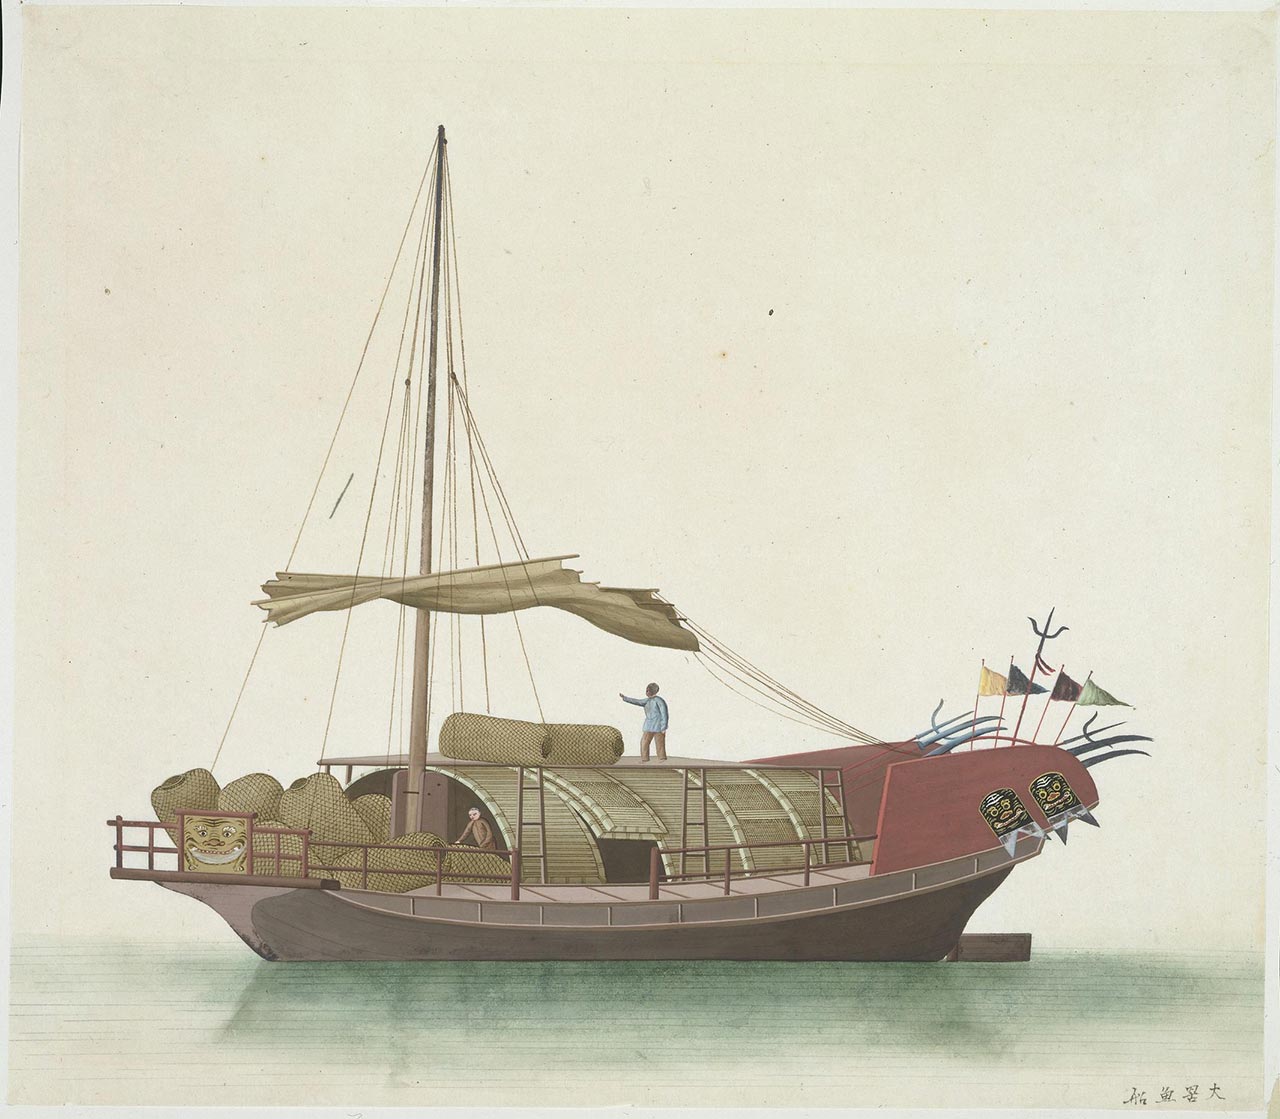 A large trawler, equipped with bamboo fishing baskets and nets.